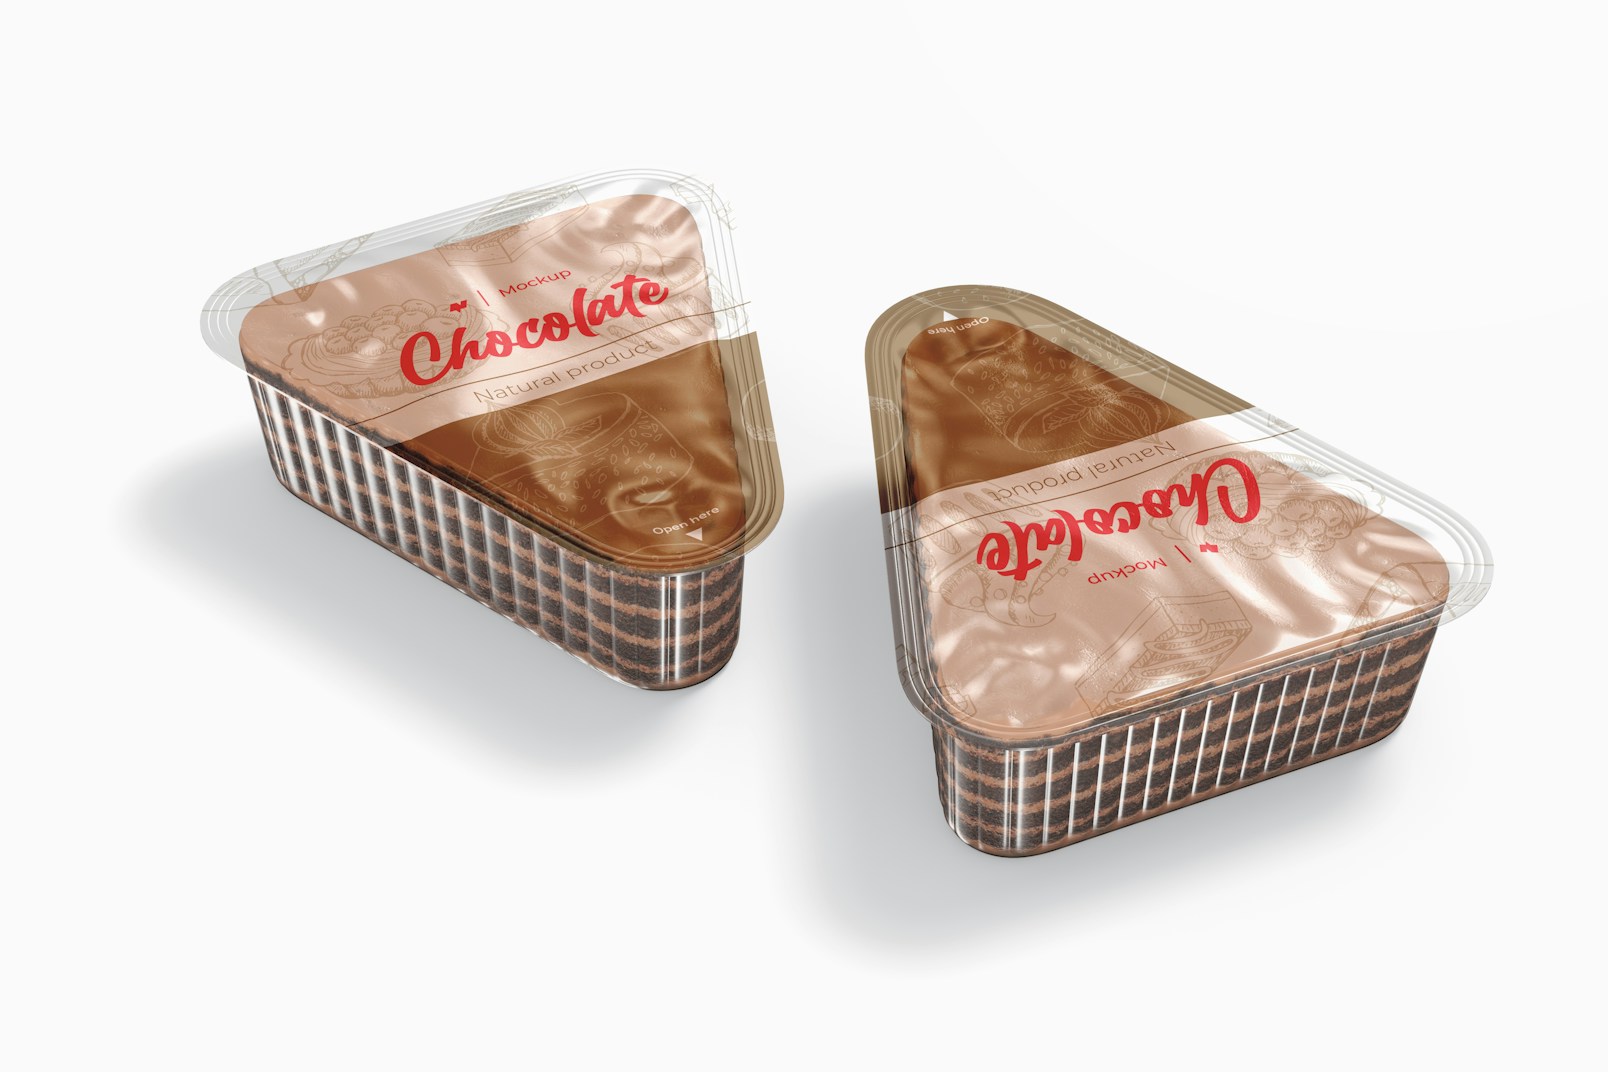 Triangular Dessert Container Mockup, On Perspective